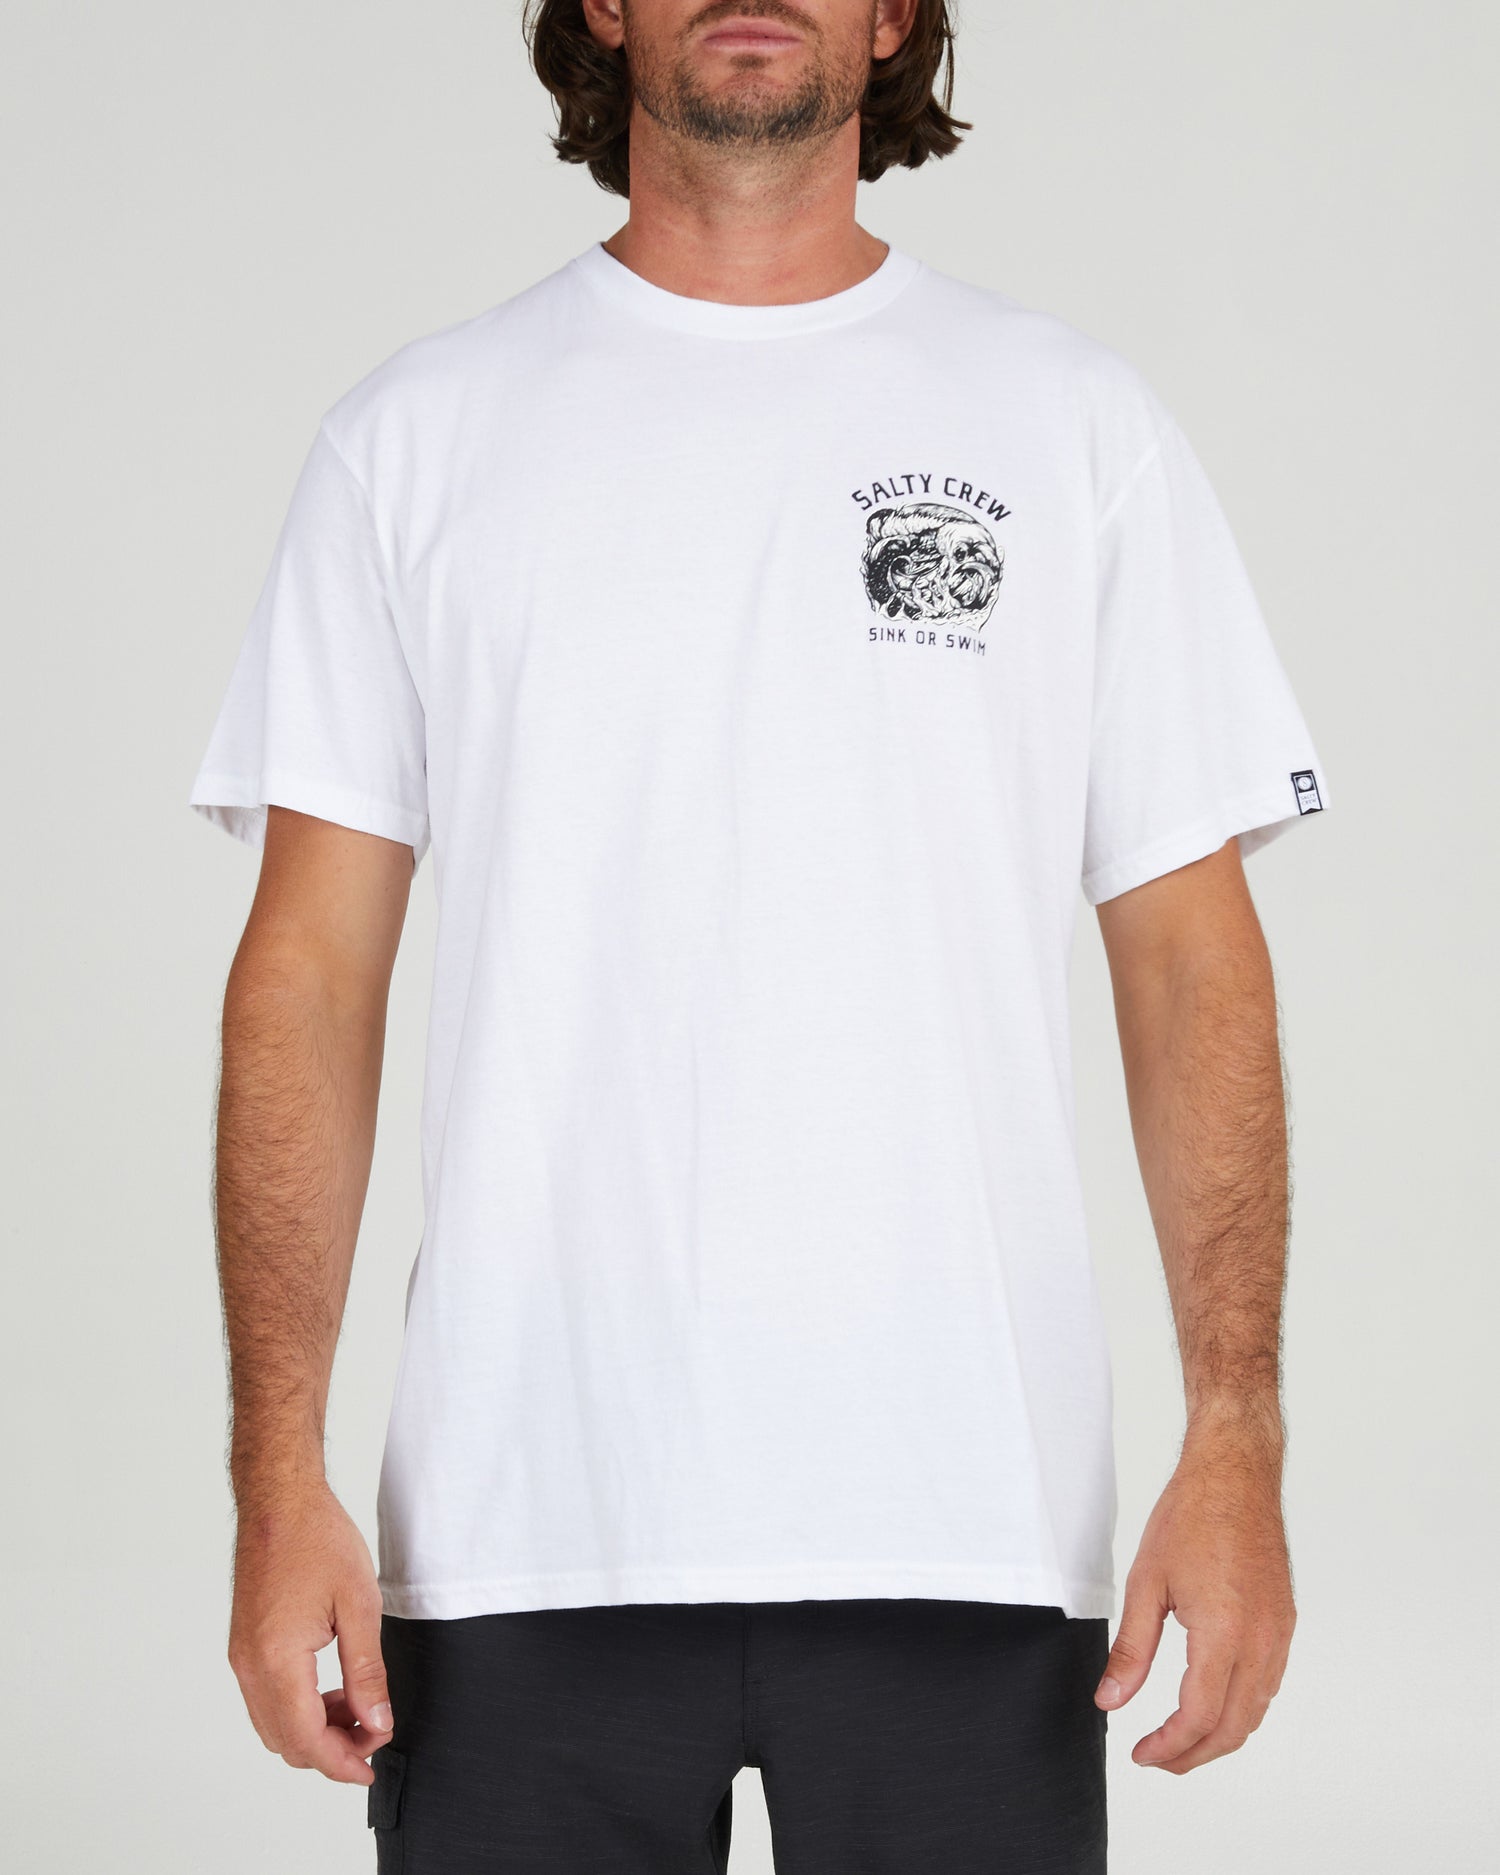 On body front of the Tsunami White S/S Standard Tee